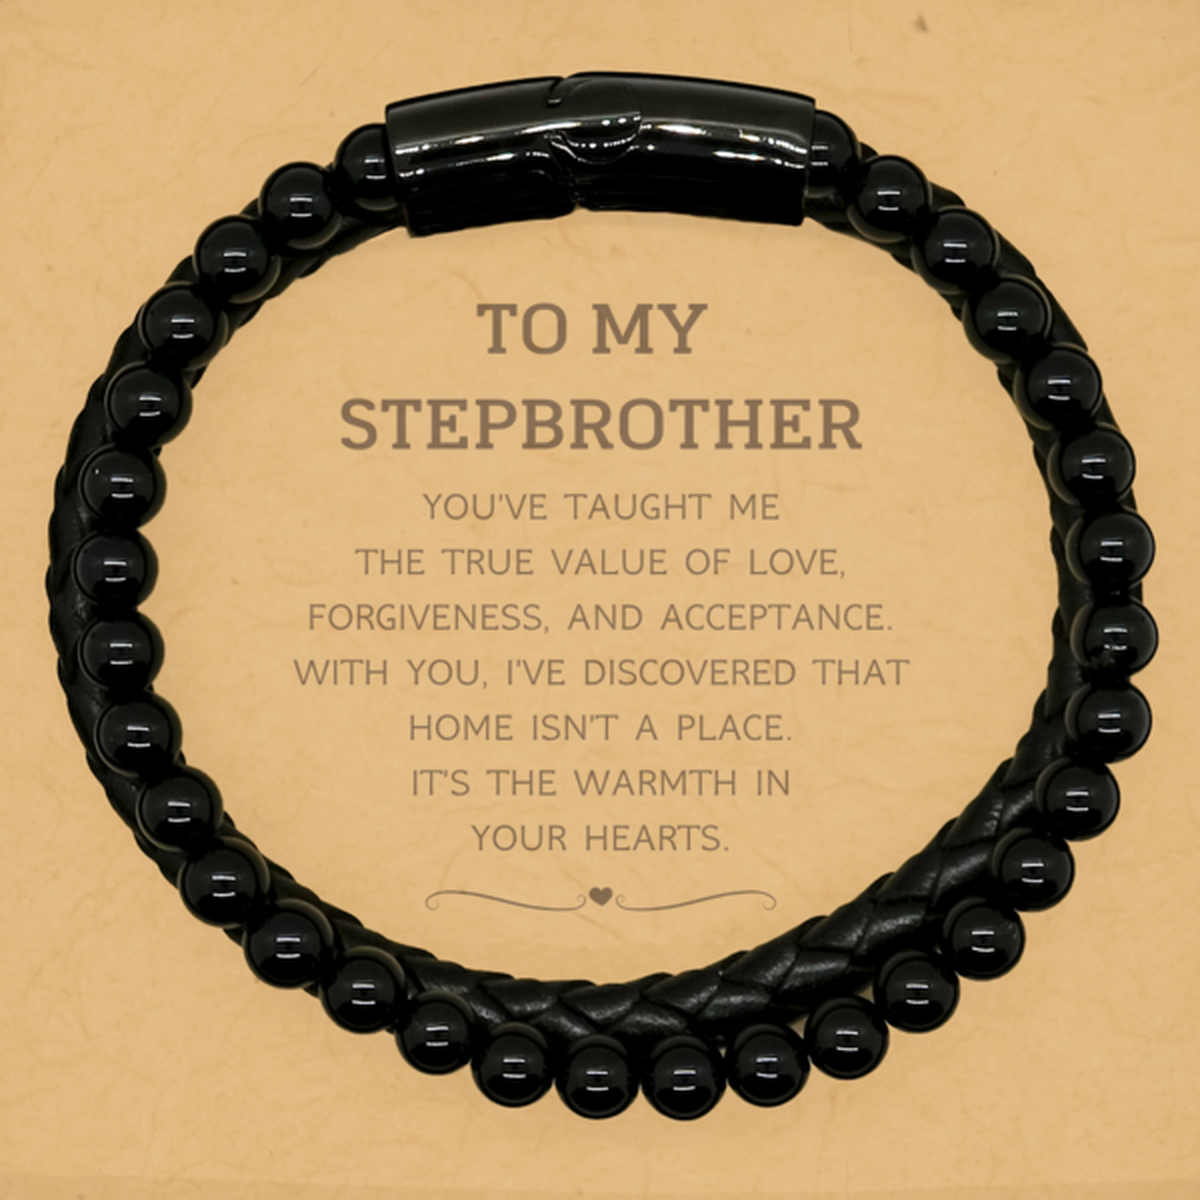 To My Stepbrother Gifts, You've taught me the true value of love, Thank You Gifts For Stepbrother, Birthday Stone Leather Bracelets For Stepbrother